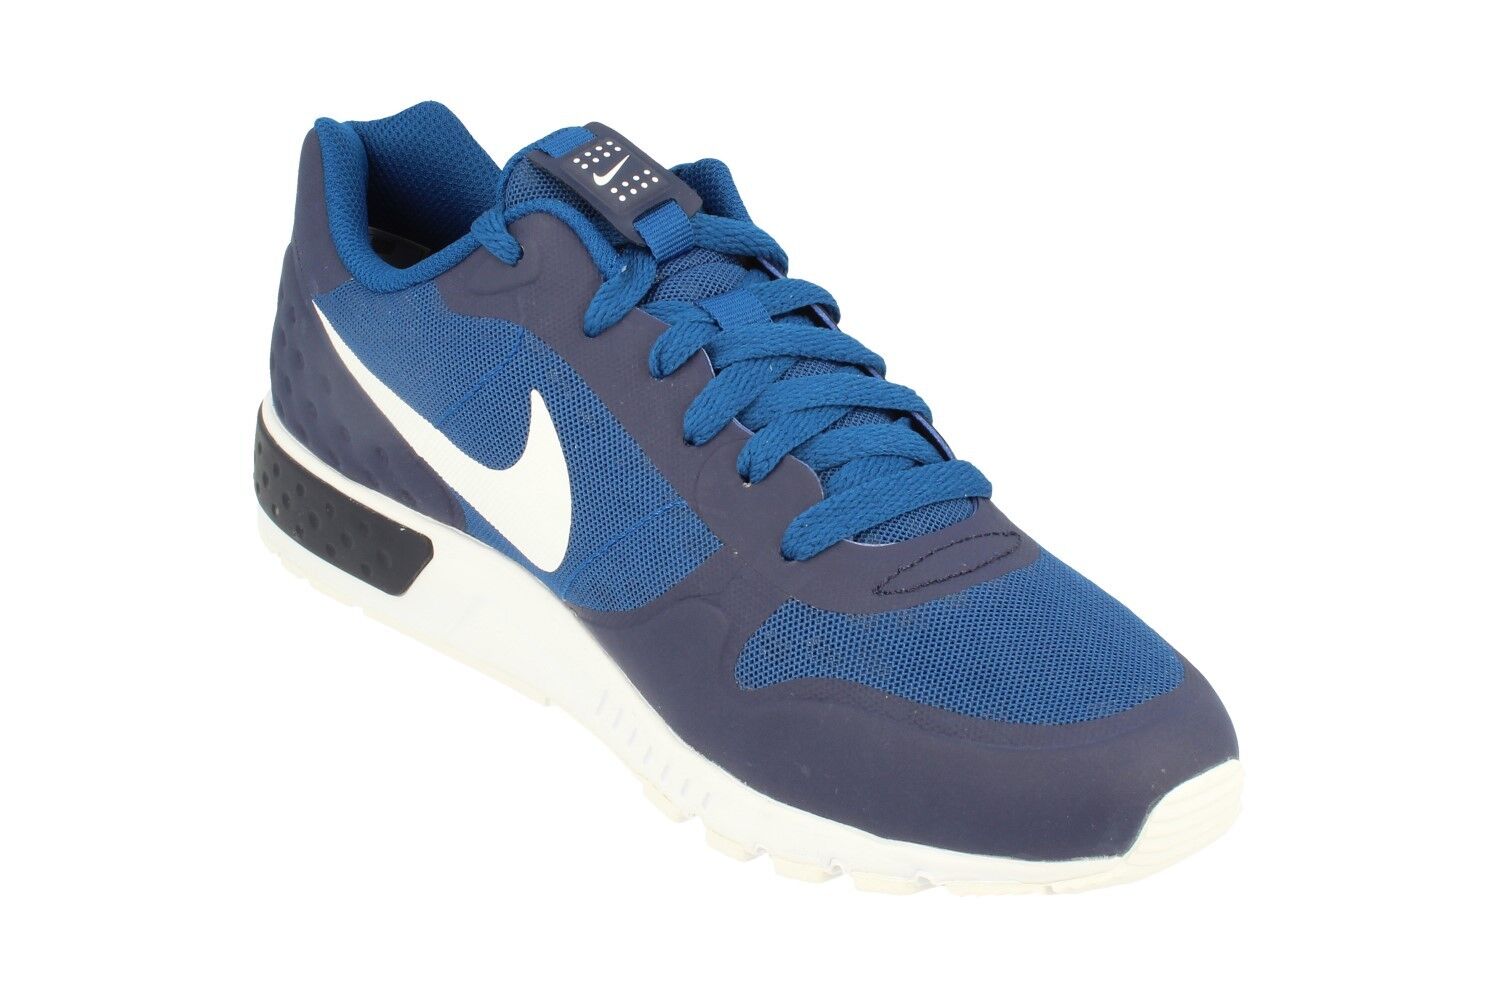 Bathtub tight Doctor of Philosophy Nike Nightgazer Lw Se Mens Running Trainers 902818 Sneakers Shoes 402